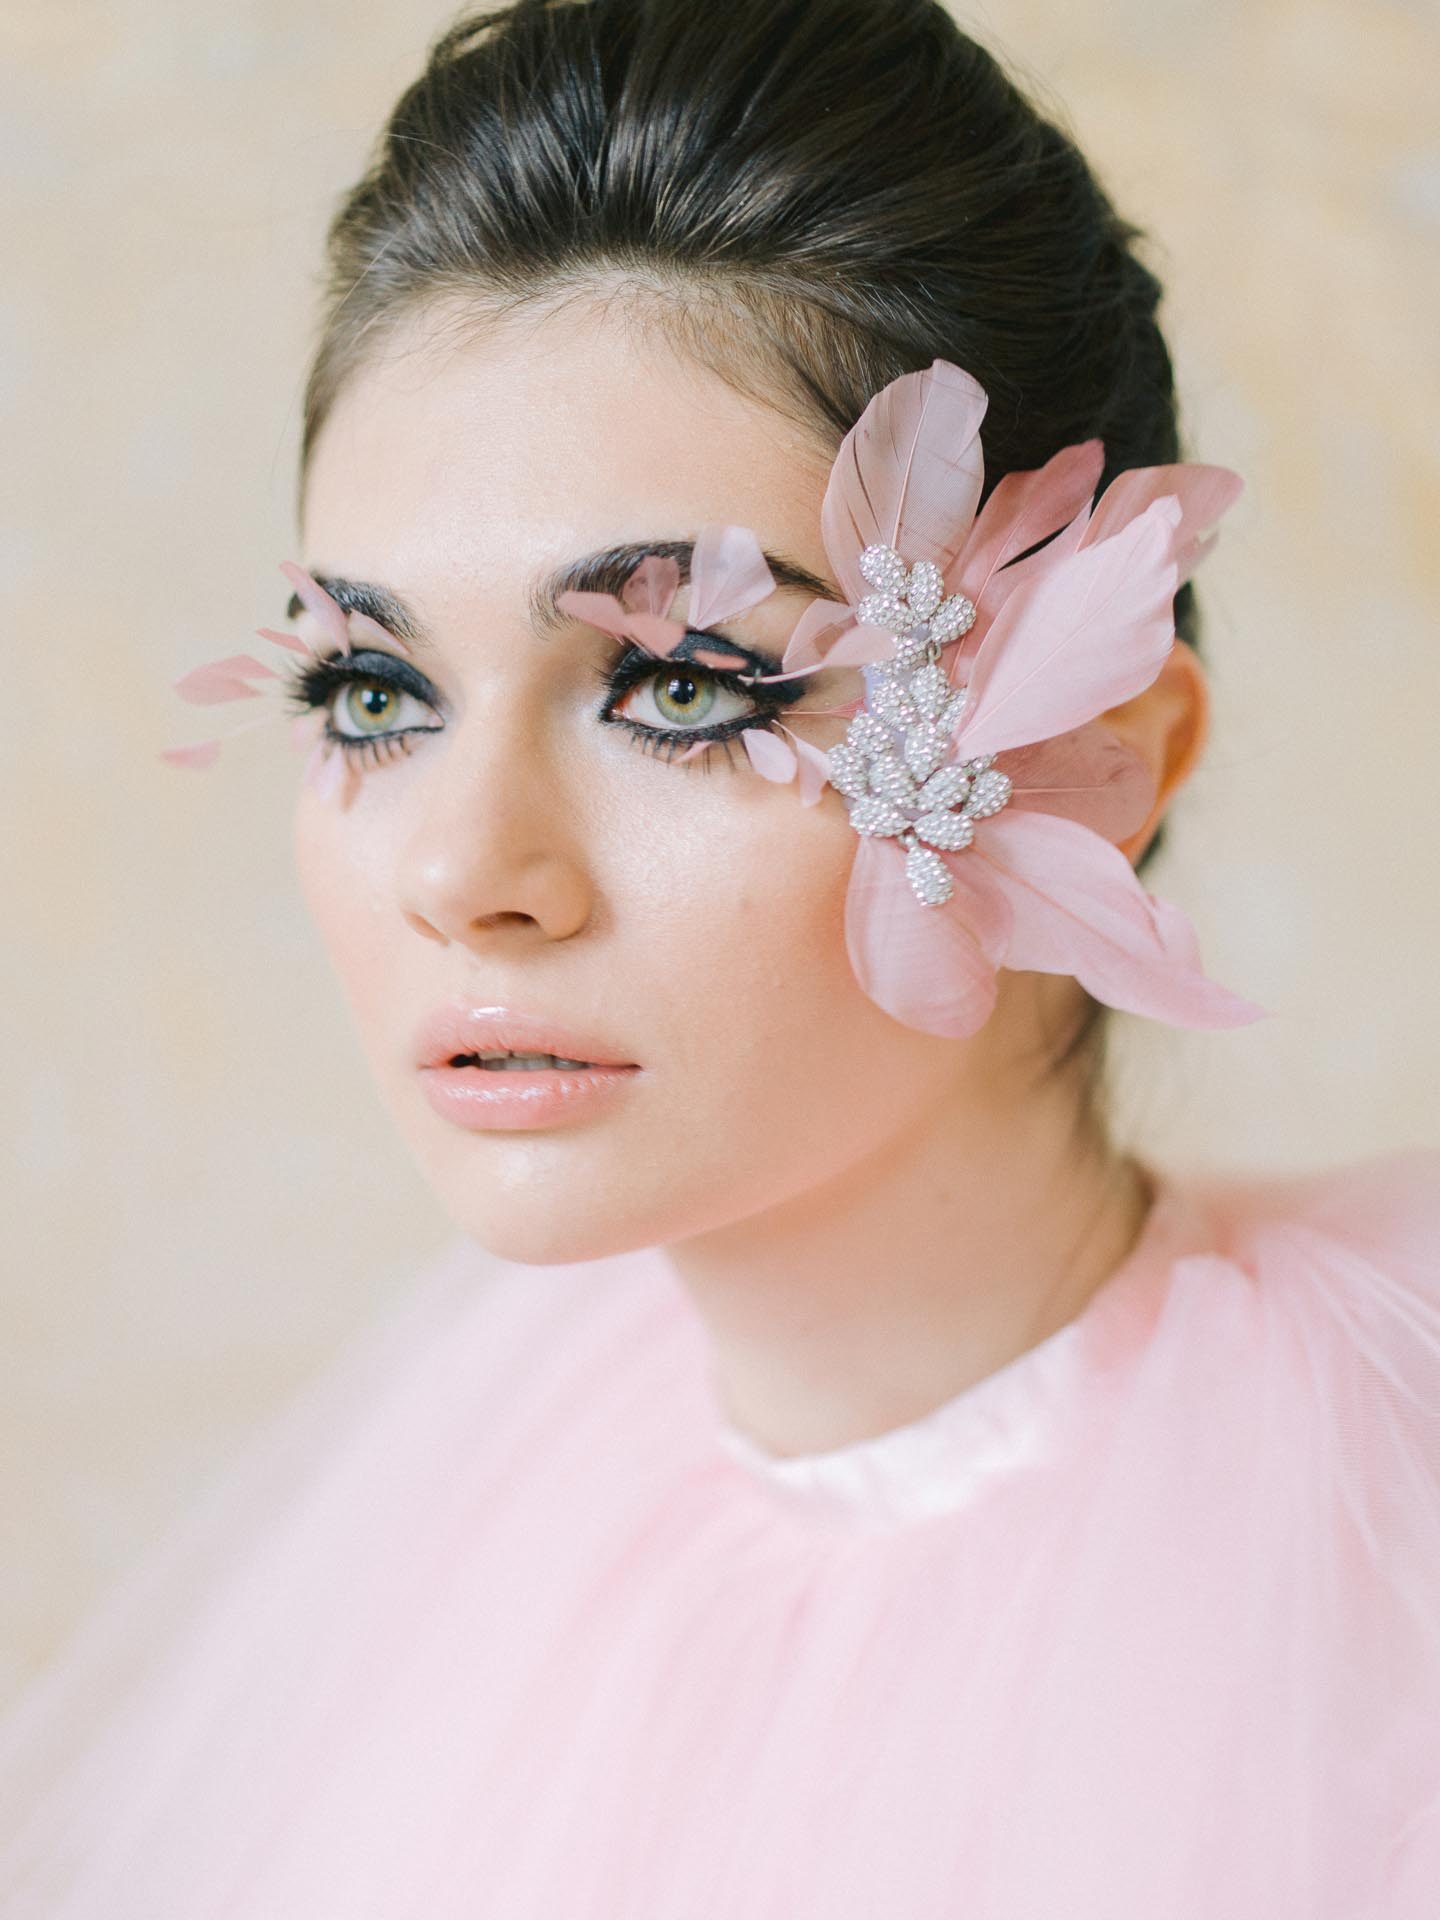 villa balbiano poetry of love styled shoot fashion inspiration harold james makeup artistic style